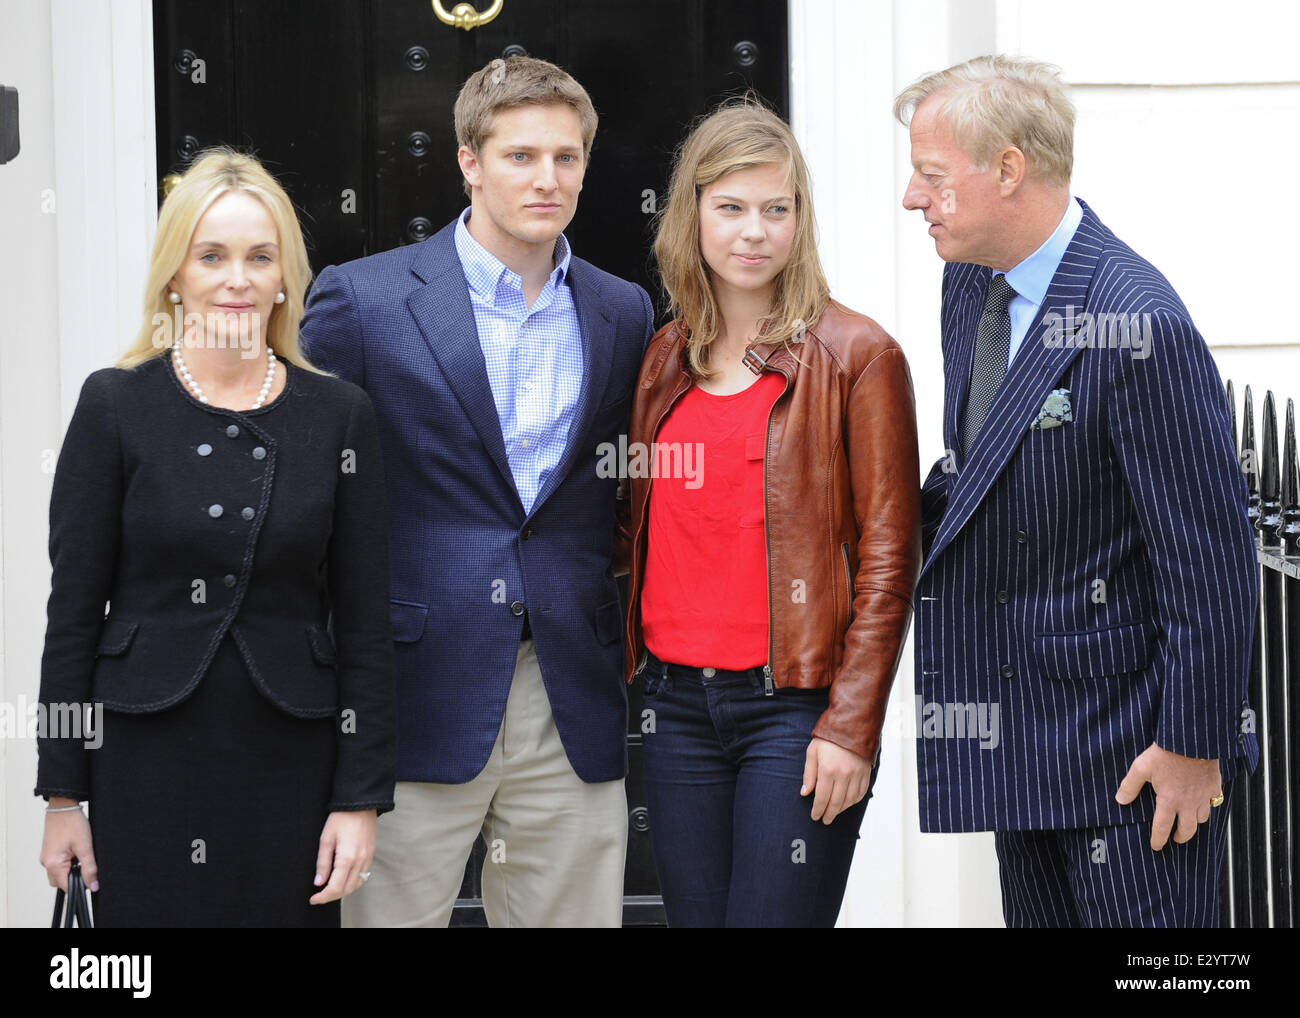 Sir Mark Thatcher with his wife Sarah-Jane and children Michael and Amanda outside Margaret Thatcher's house  Featuring: Sarah-Jane Thatcher,Michael Thatcher,Amanda Thatcher,Sir Mark Thatcher Where: London, United Kingdom When: 15 Apr 2013 Stock Photo